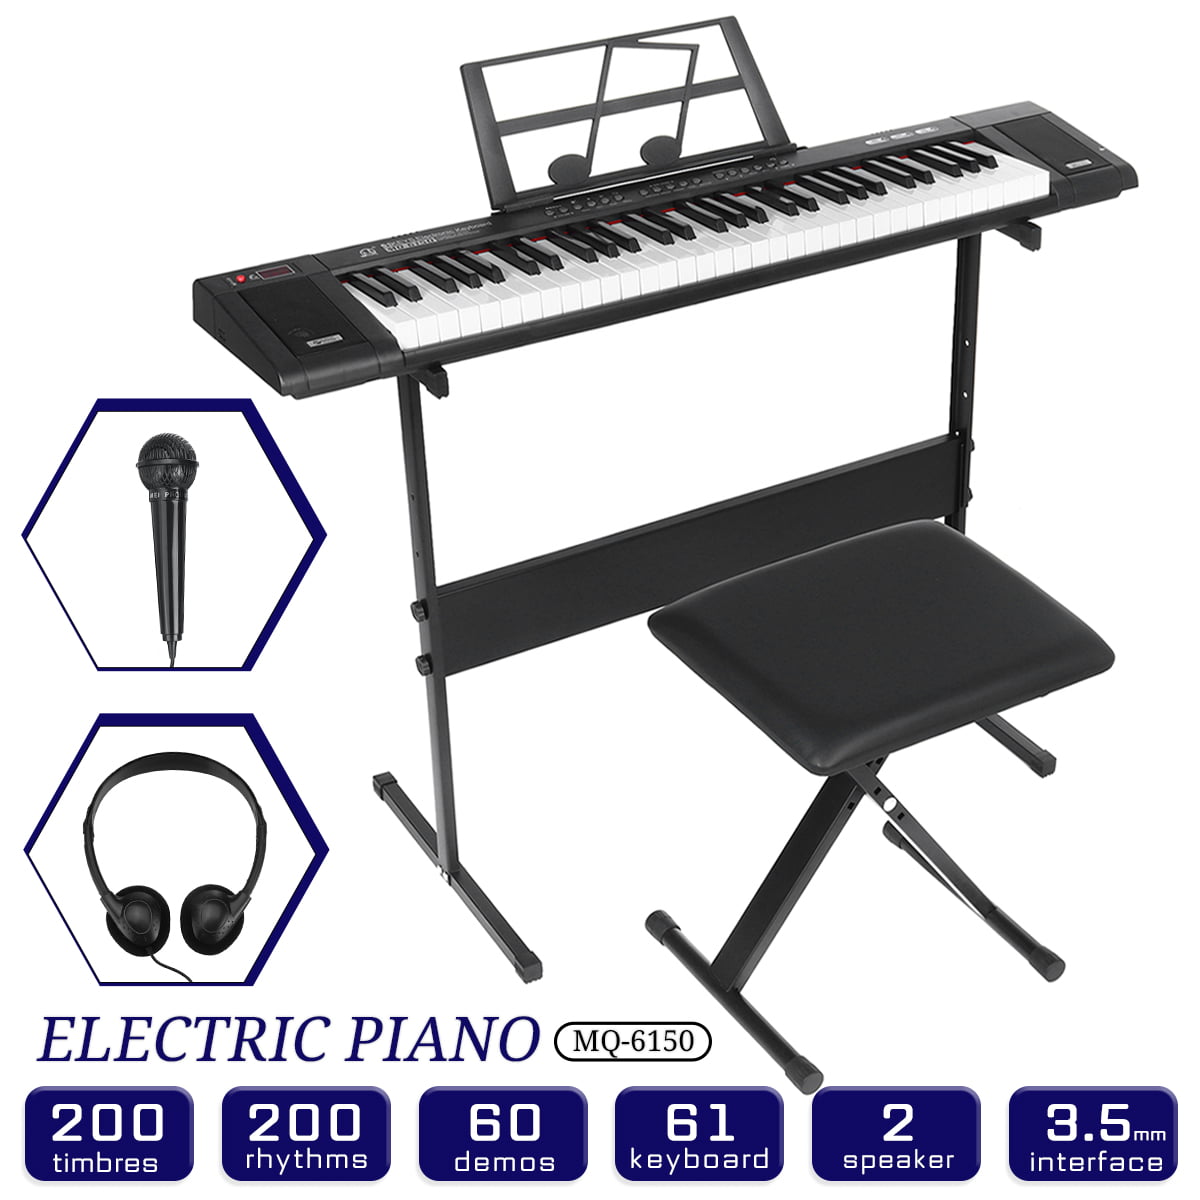 Microphone LCD Screen Headphones 3 Teaching Modes Bonnlo 61-Key Portable Electronic Piano Standred Keyboard for Beignners w/Lighted Keys Built-In Speakers